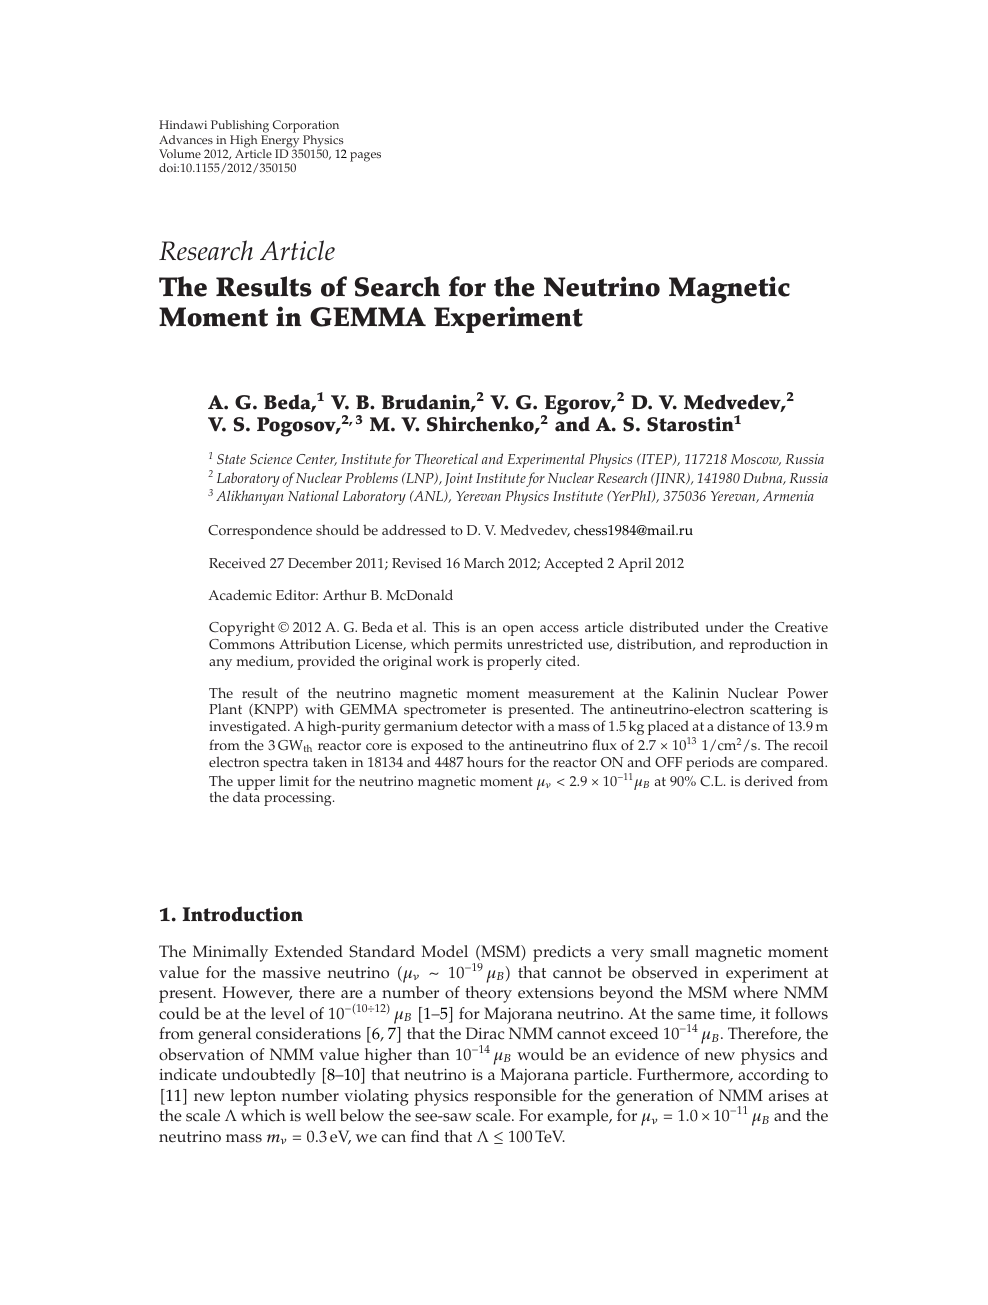 The Results Of Search For The Neutrino Magnetic Moment In Gemma Experiment Topic Of Research Paper In Physical Sciences Download Scholarly Article Pdf And Read For Free On Cyberleninka Open Science